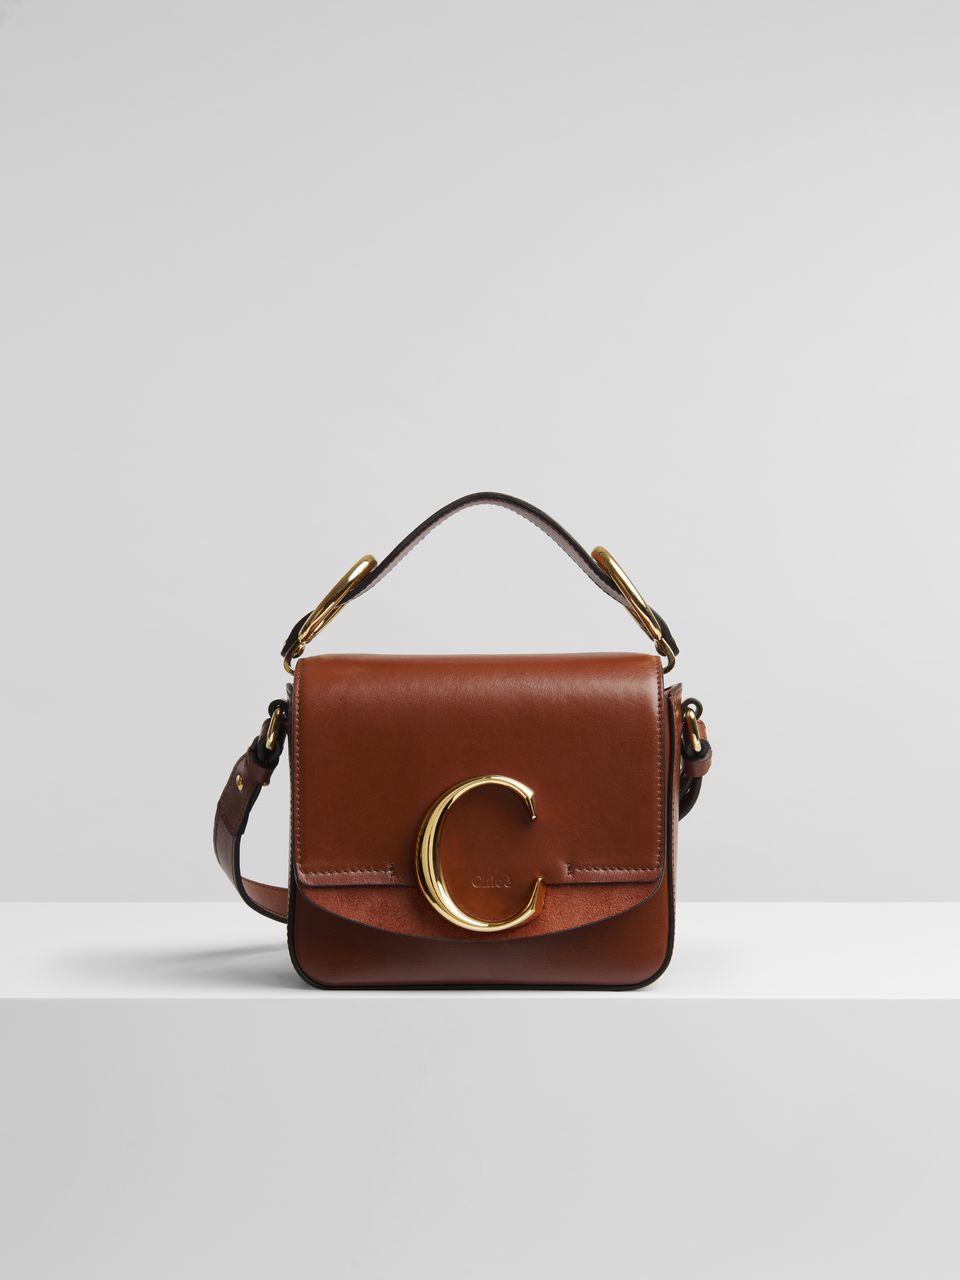 Chloe Spring/Summer 2019 Bag Collection Features The C Bag - Spotted Fashion